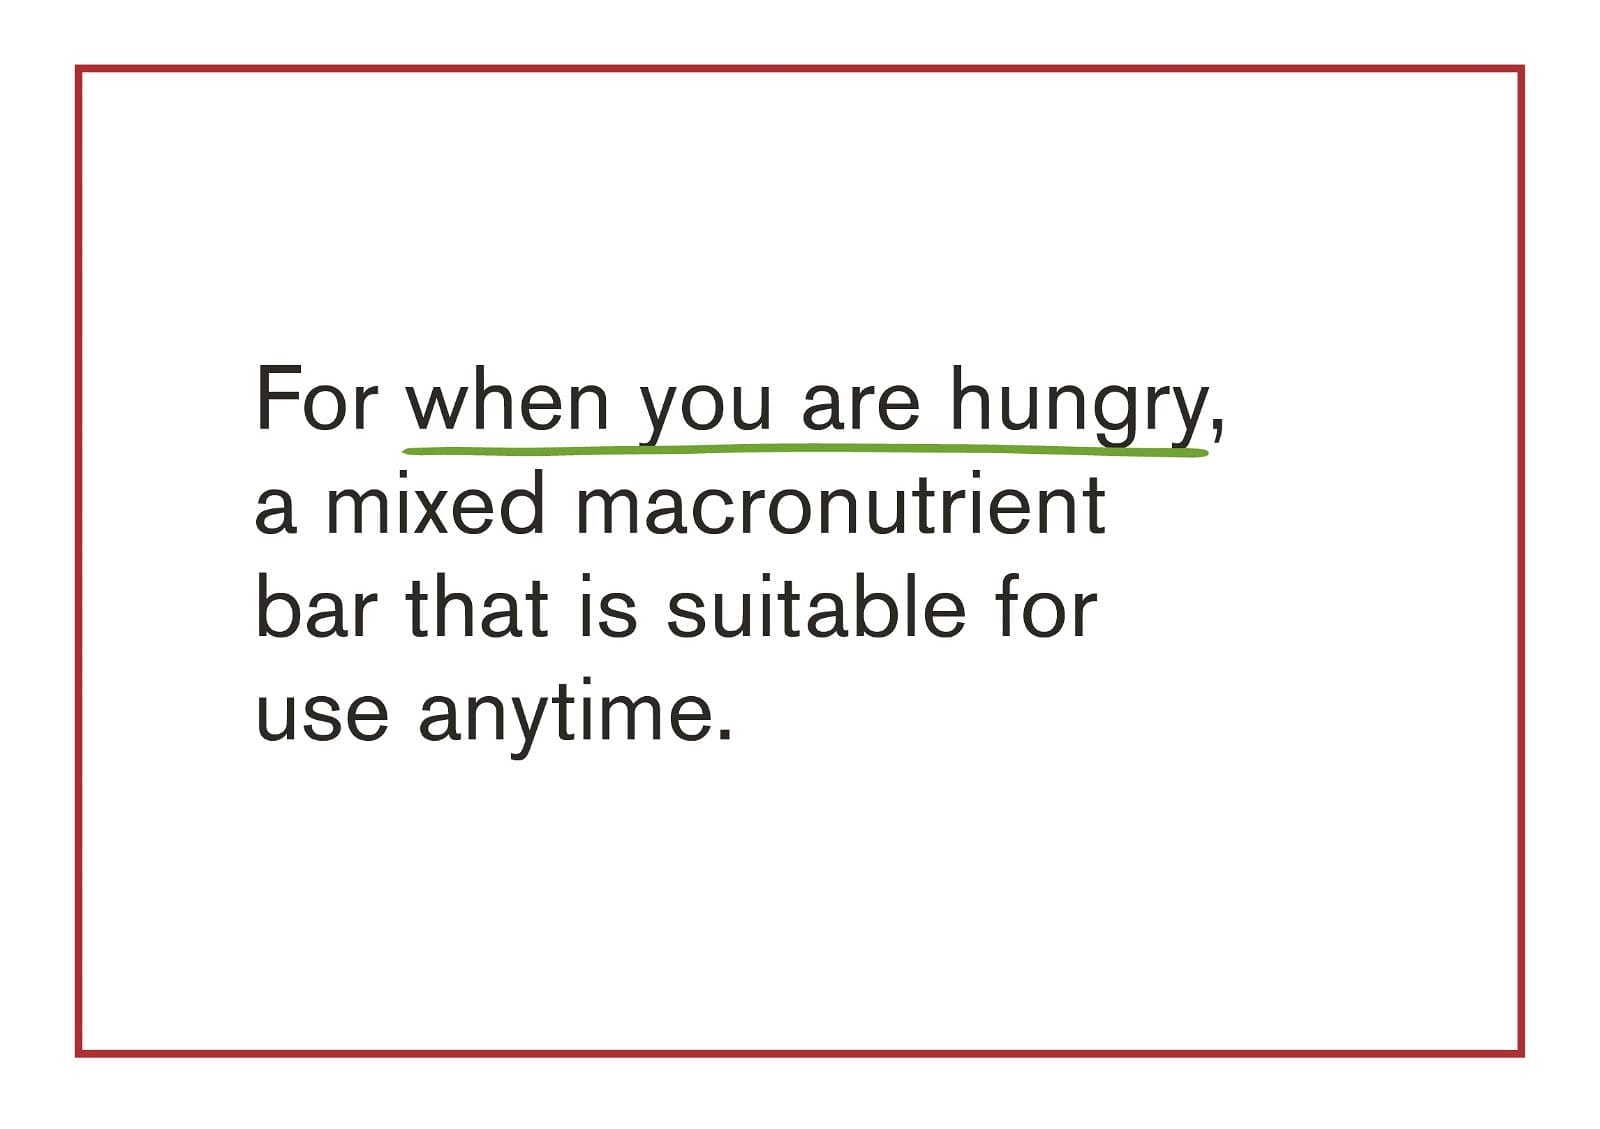 For when you are hungry, a mixed macronutrient bar that is suitable for use anytime.